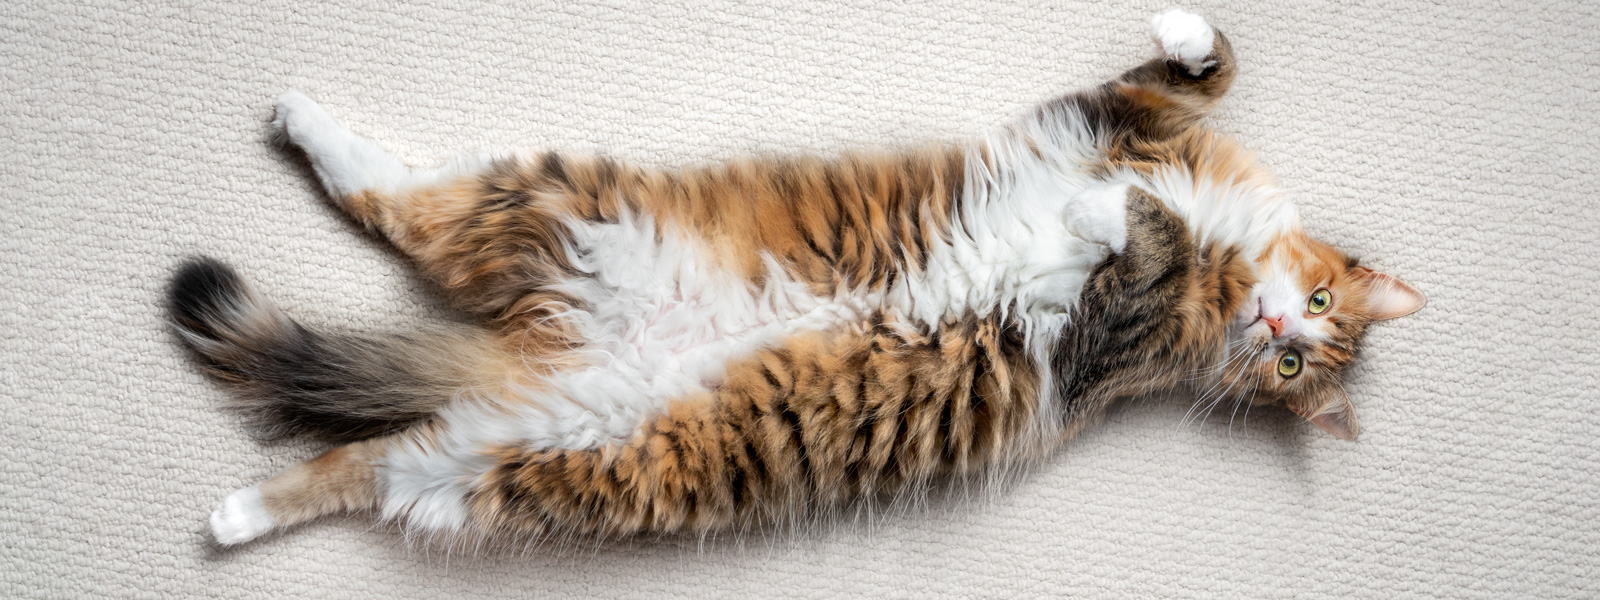 Cat lies on its back on a carpeted floor and looks into the camera